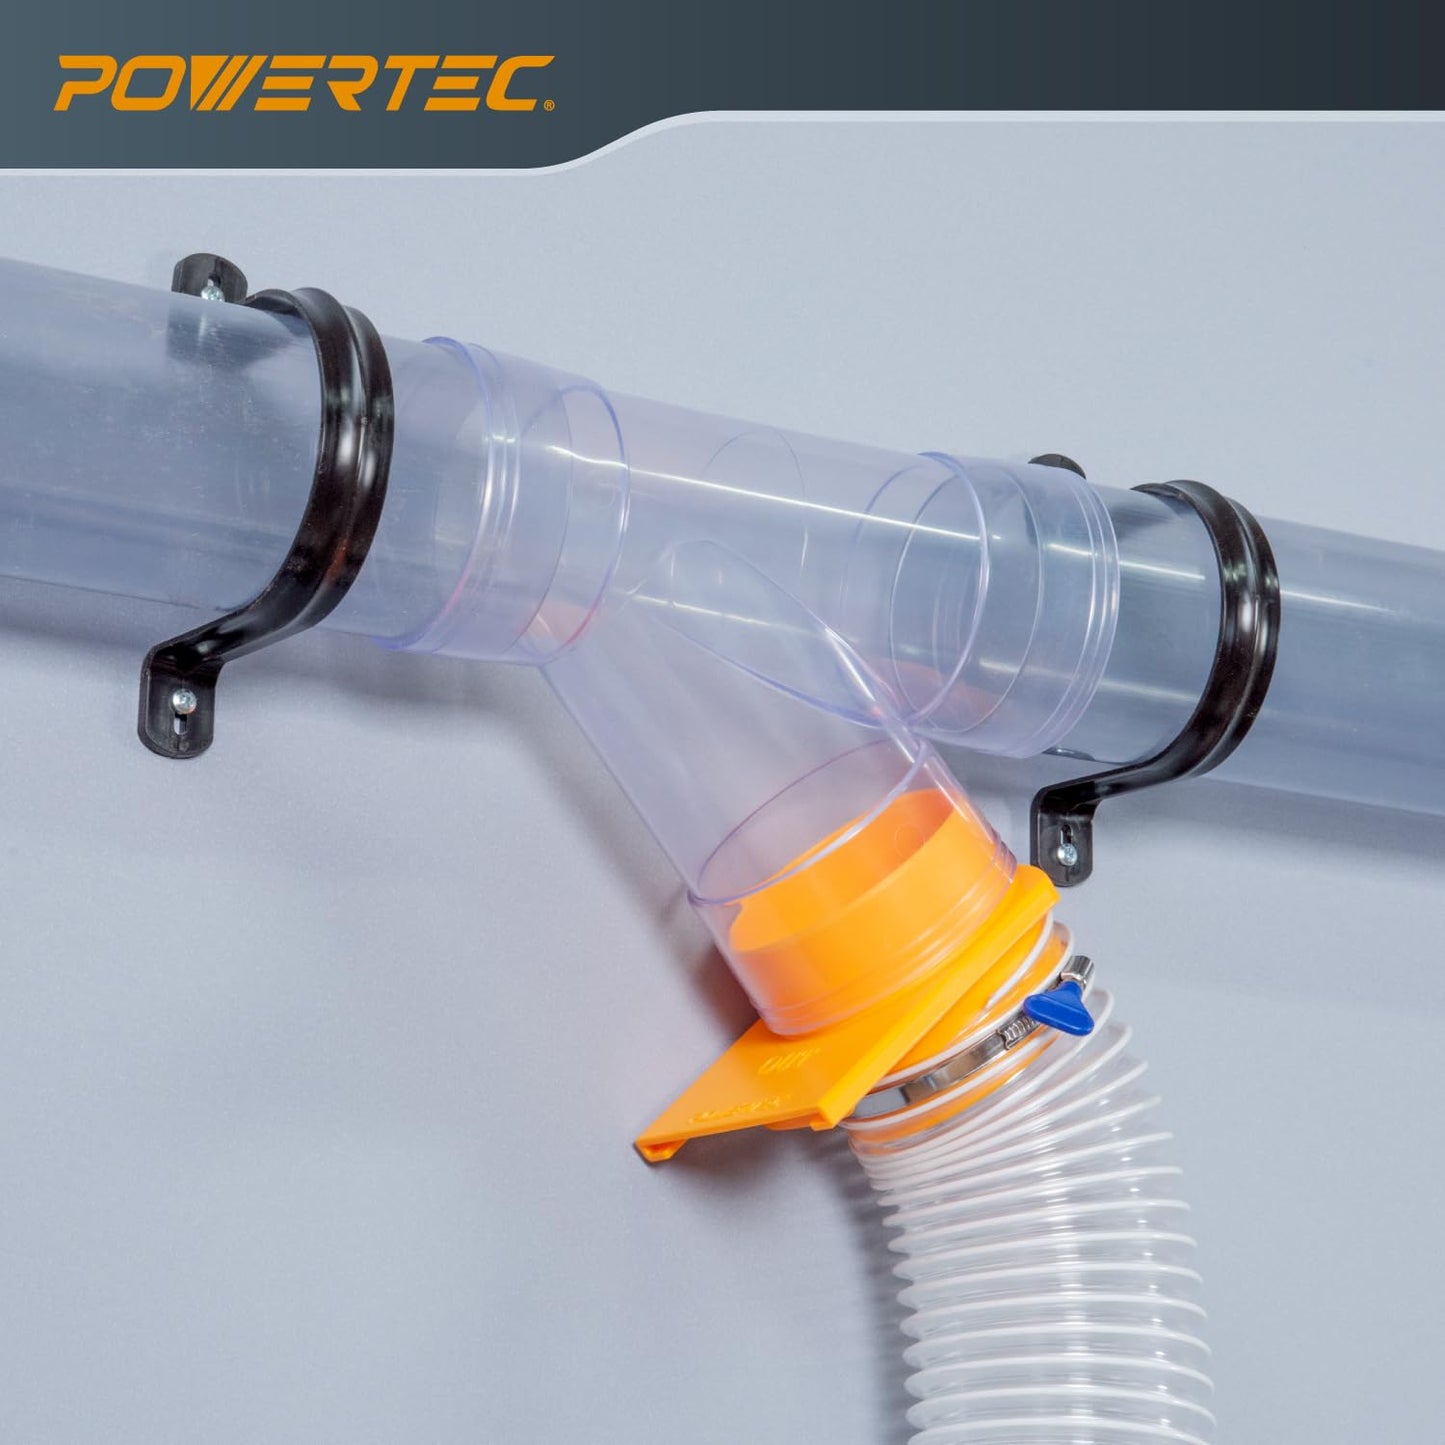 POWERTEC 70306 4 Inch Dust Collection Fittings Network with Dust Hose Splice, Blast Gates, Pipes, 90-Degree Elbow Connector, Y-fittings, Mounting